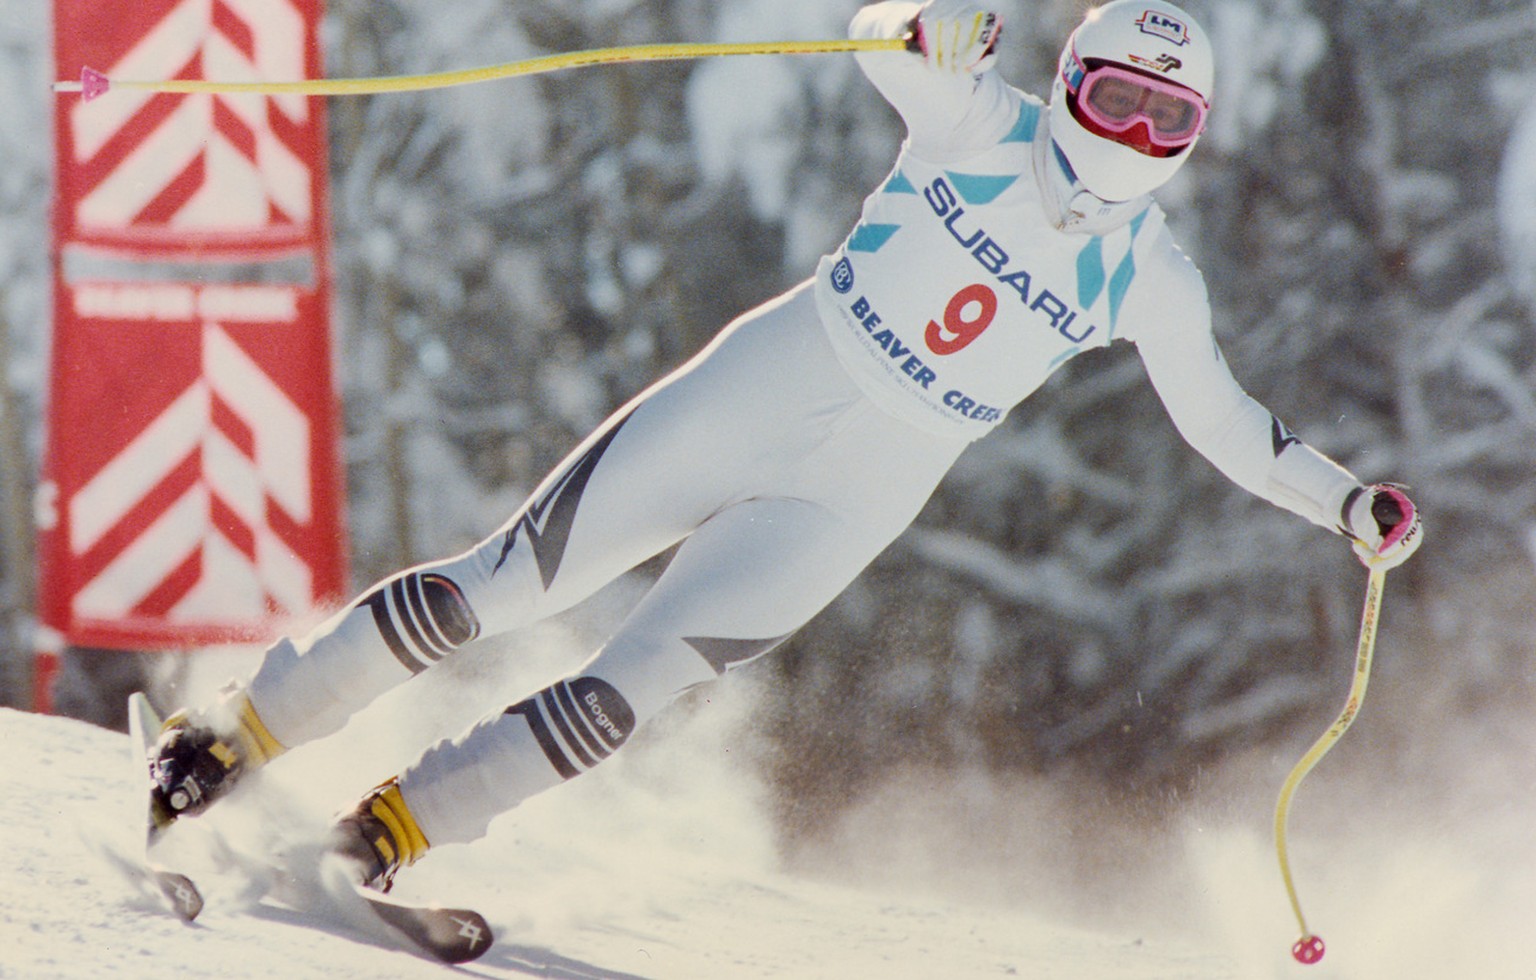 EN ROUTE TO GOLD: West Germany«s Hansjoerg Tauscher flies past a course gate on the men«s downhill Monday, Febr. 06, 1989, headed for a gold-medal victory in the World Alpine Ski Championships from Va ...